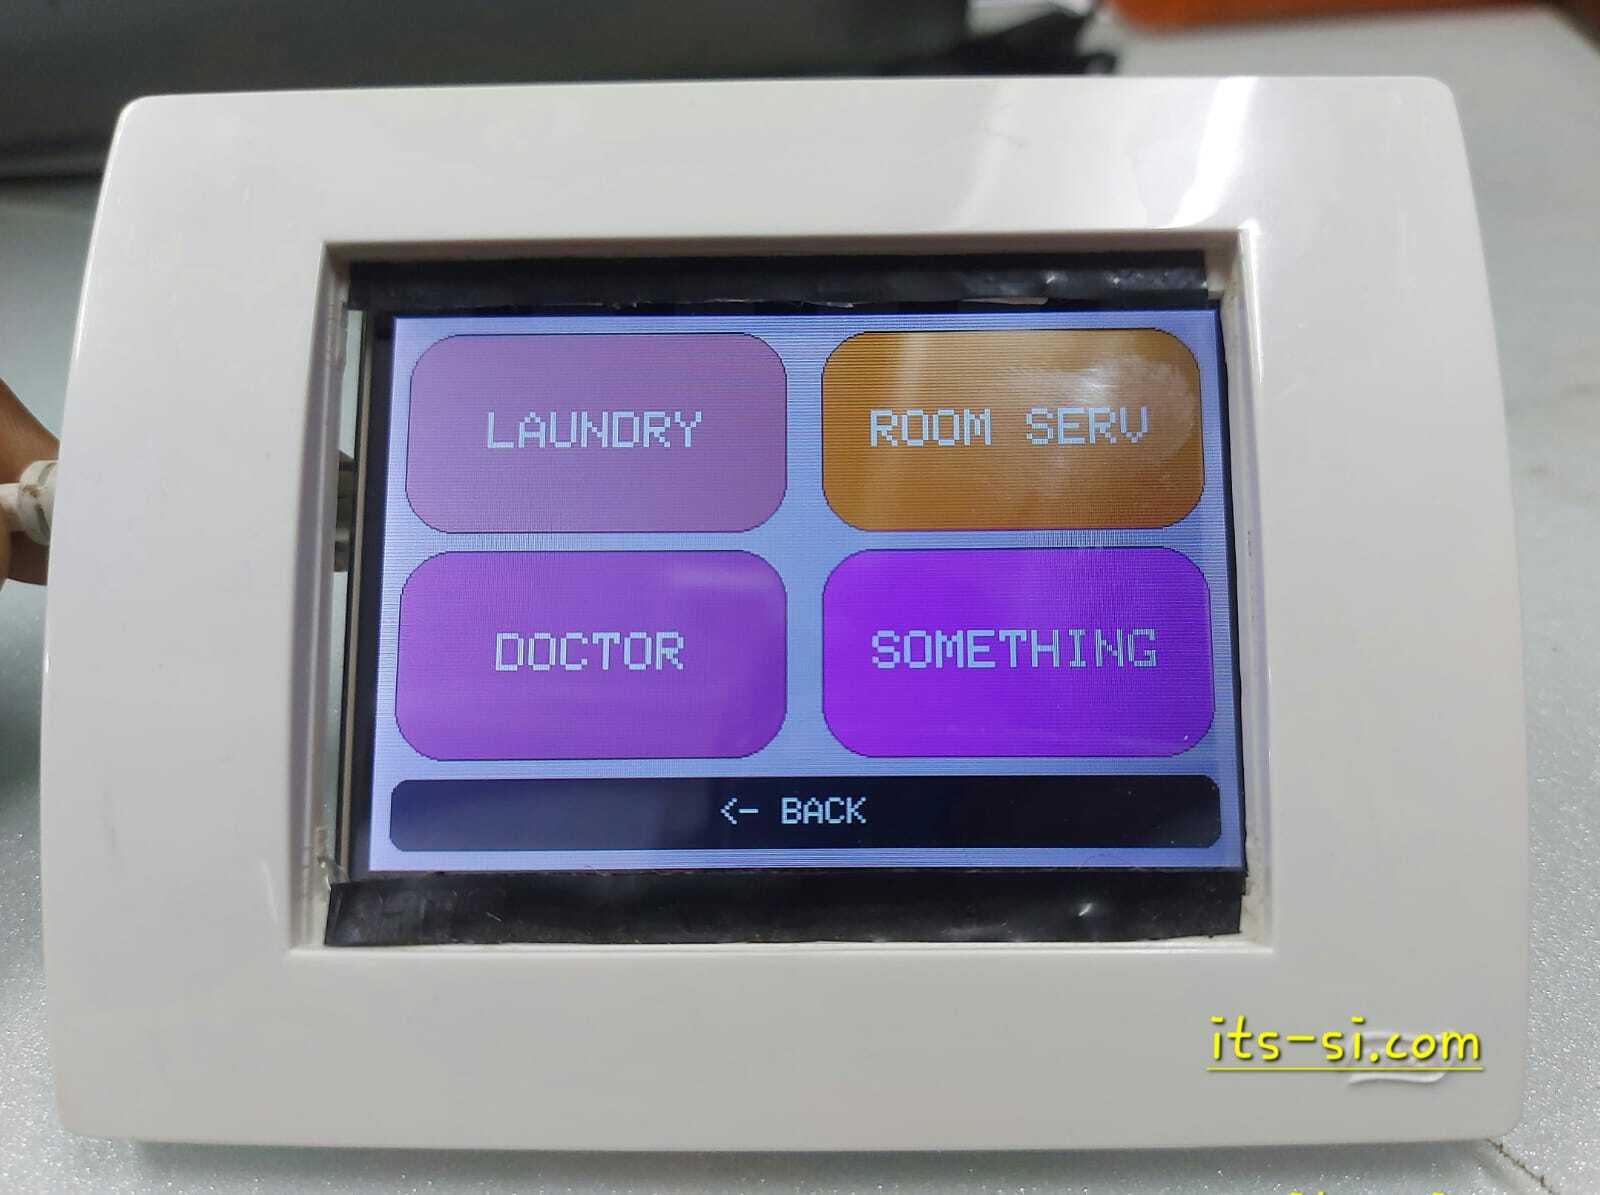 Nurse Call system with Touch Screen bed side units